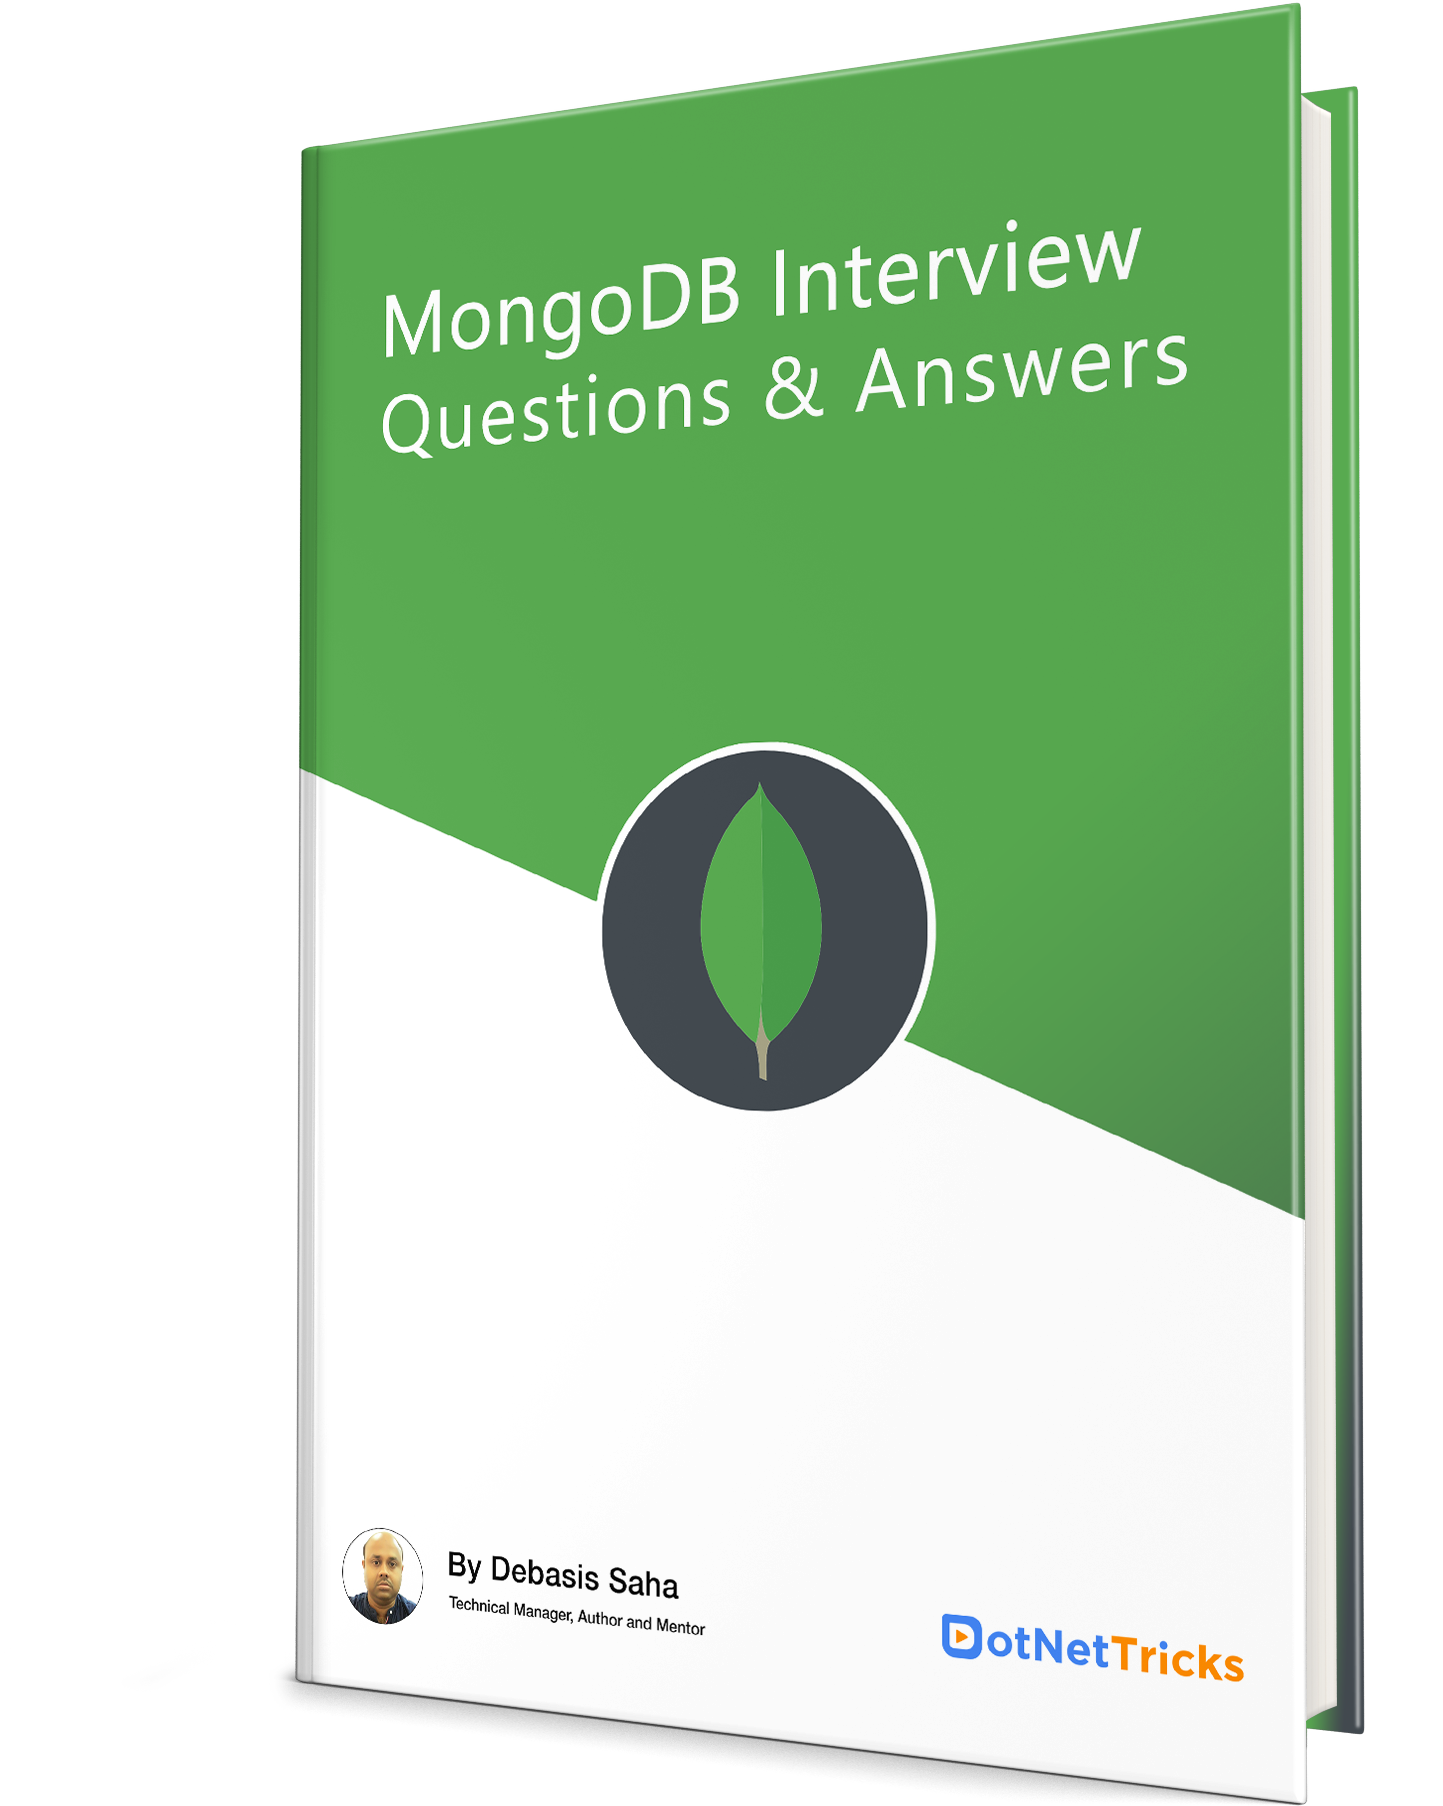 MongoDB Interview Questions & Answers eBook